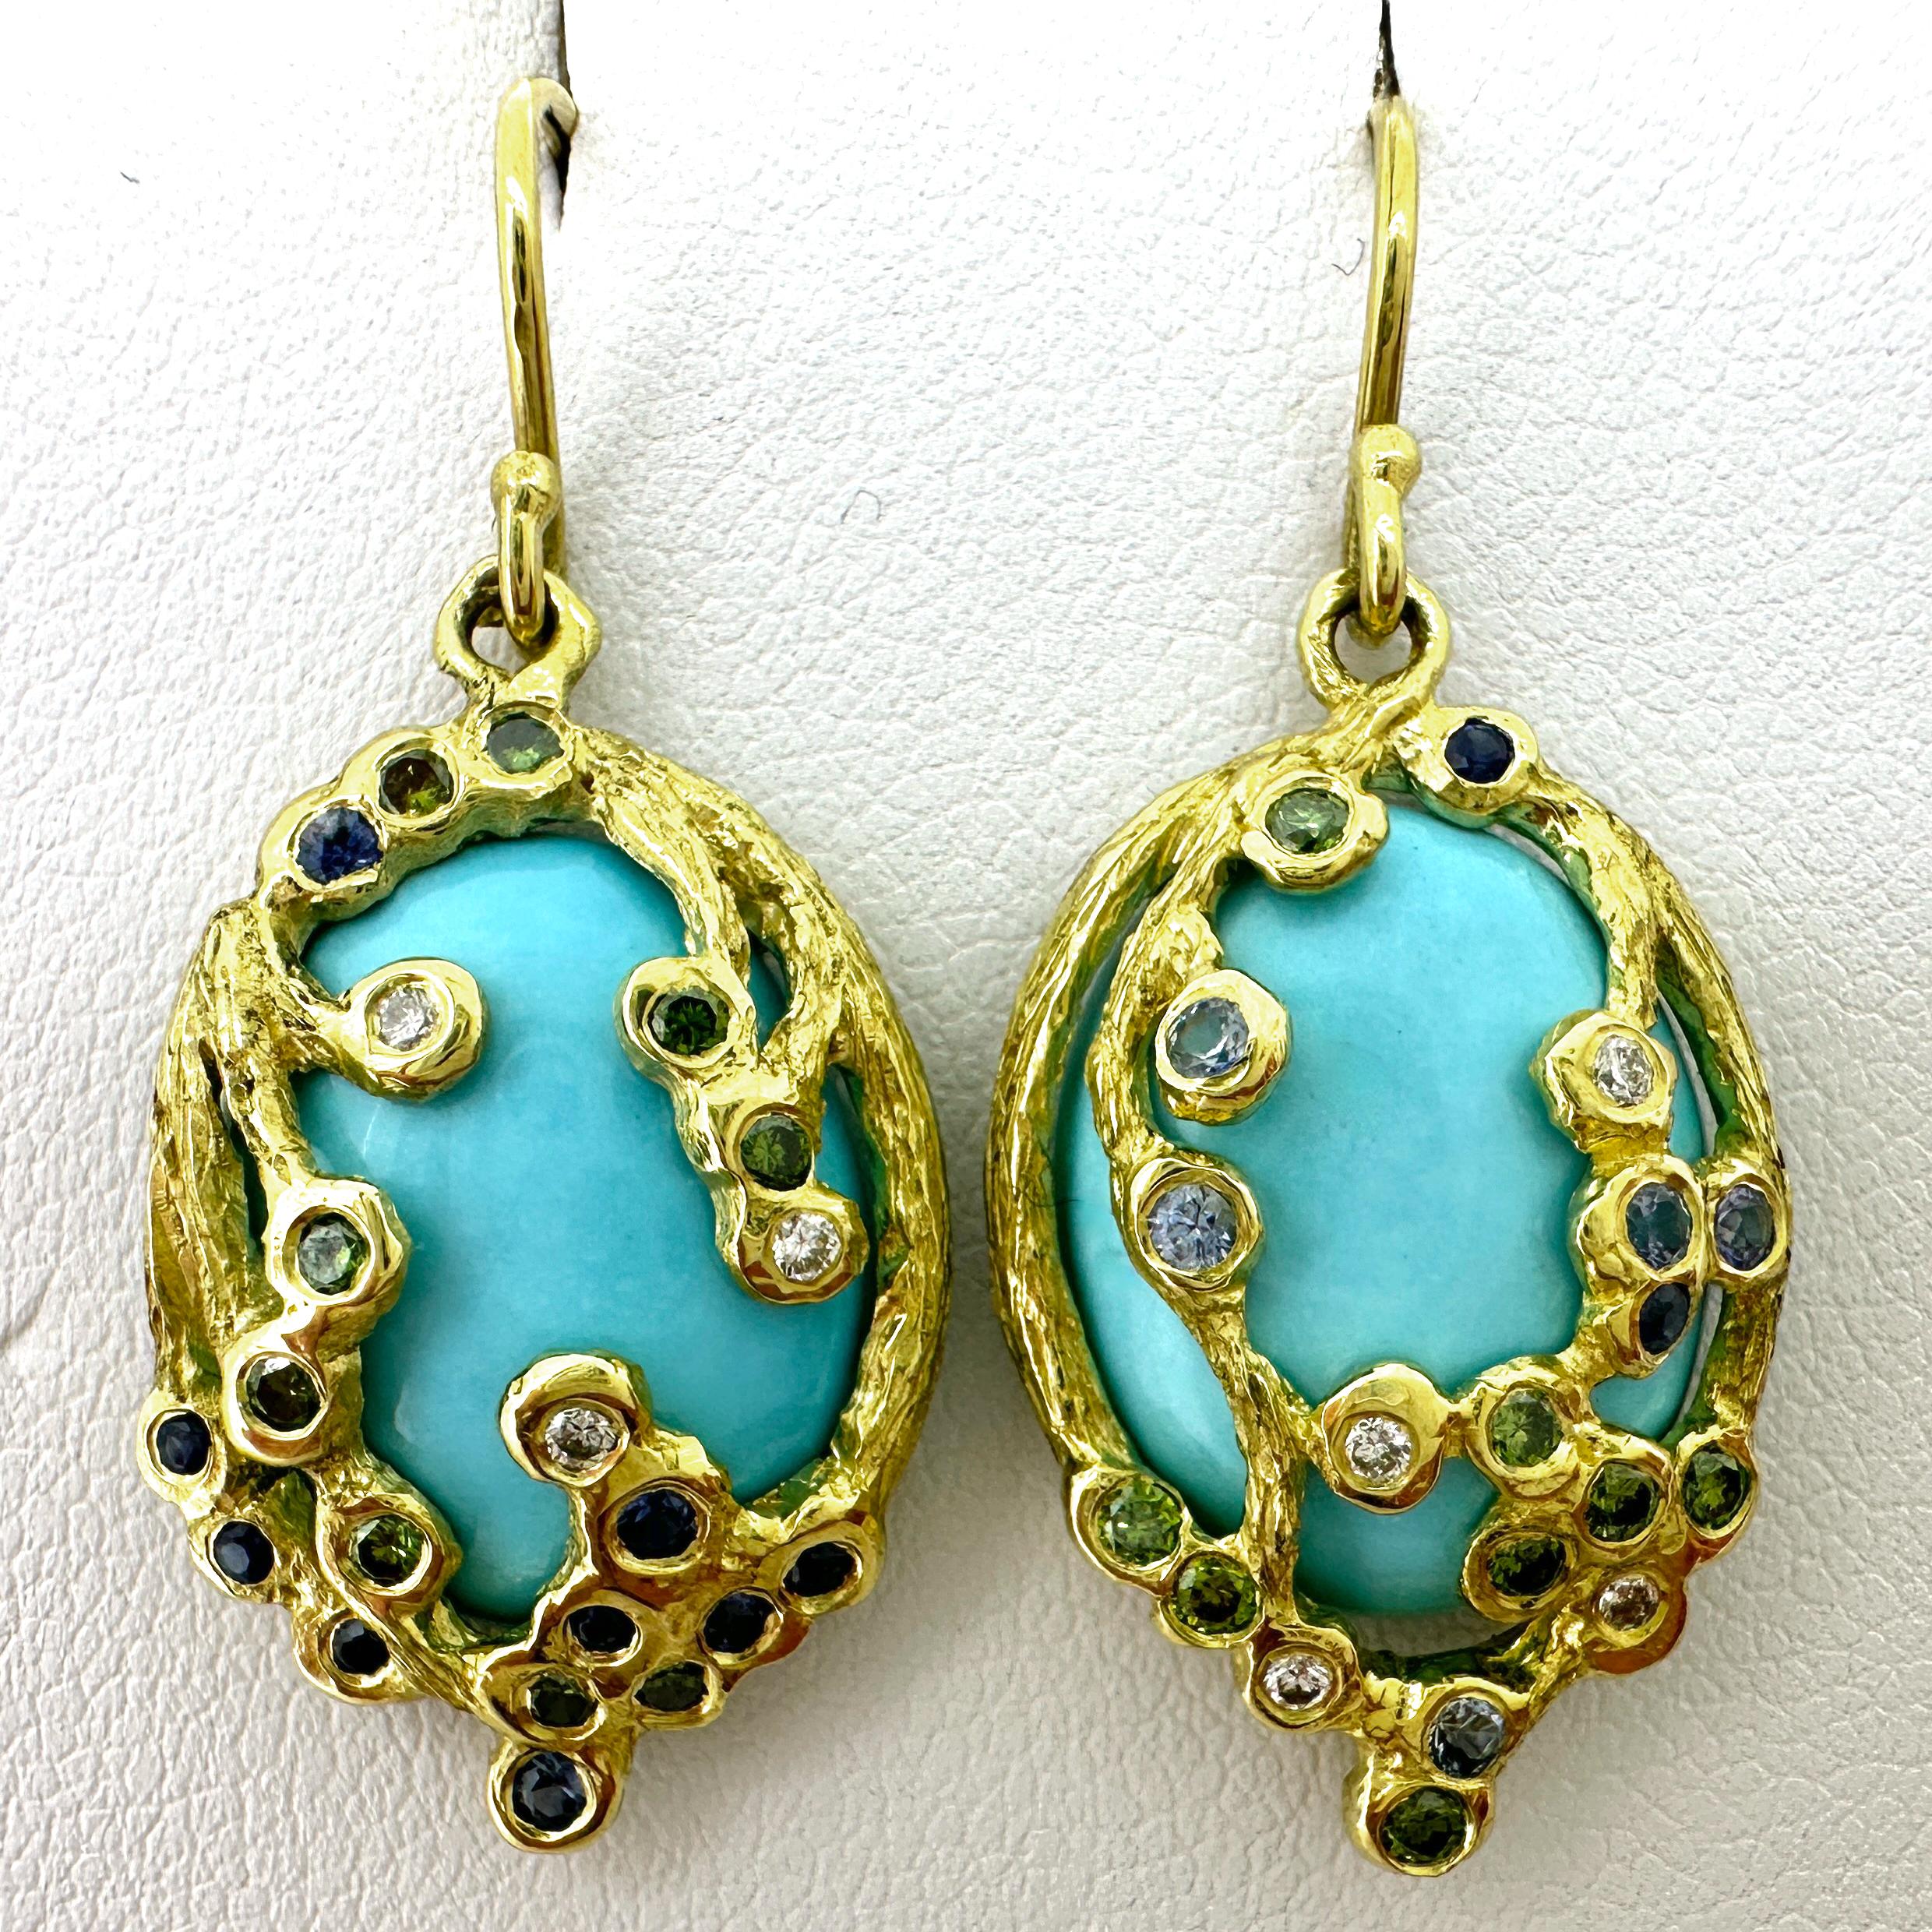 Sleeping Beauty Turquoise Earrings in 18 Karat Gold with Diamonds & Sapphires For Sale 2